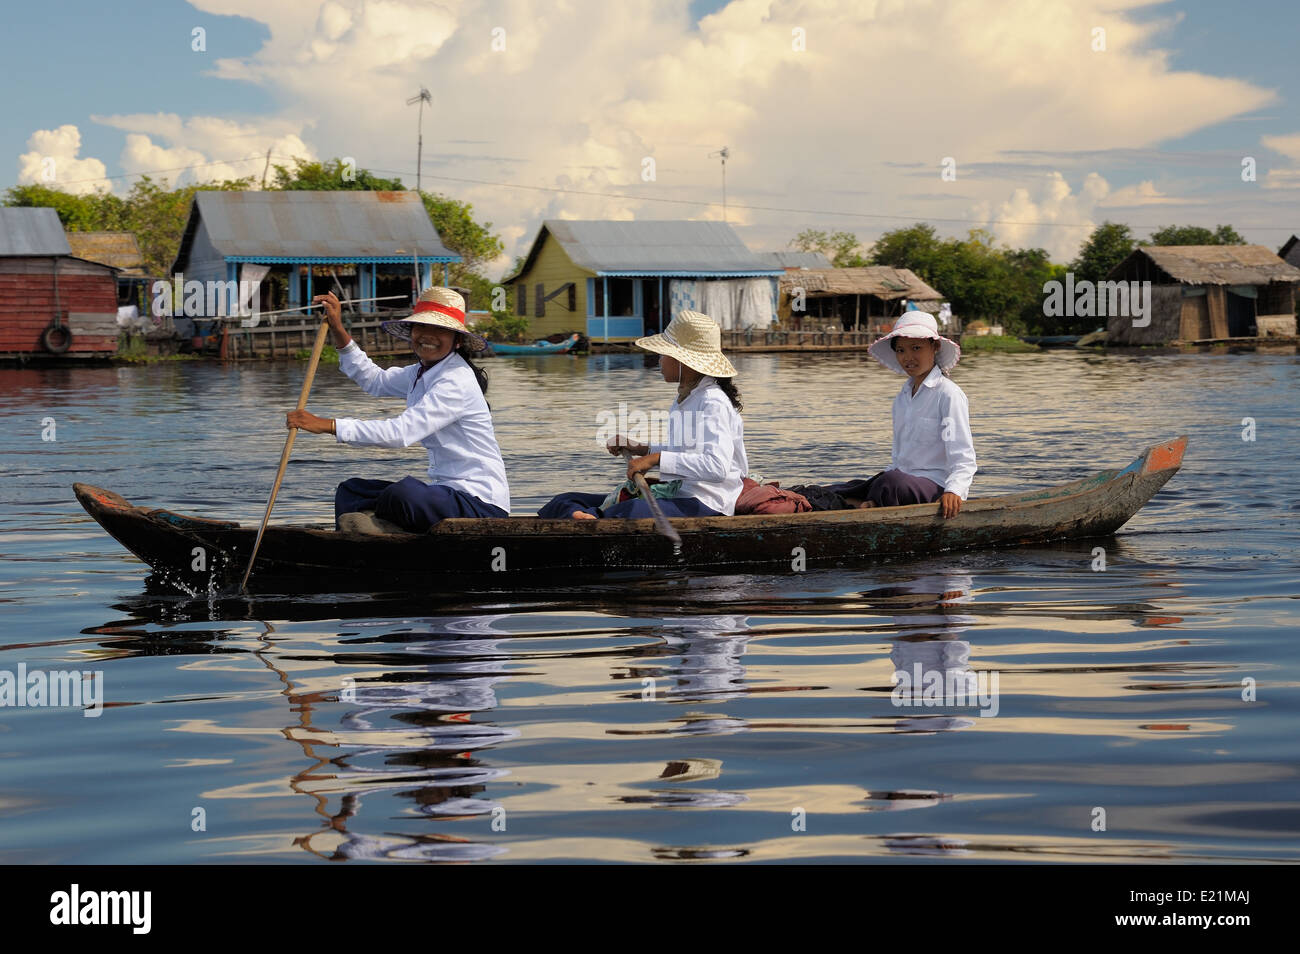 Girls commuting to school on a small raw boat on the Tonle Sap Lake in Cambodia Stock Photo